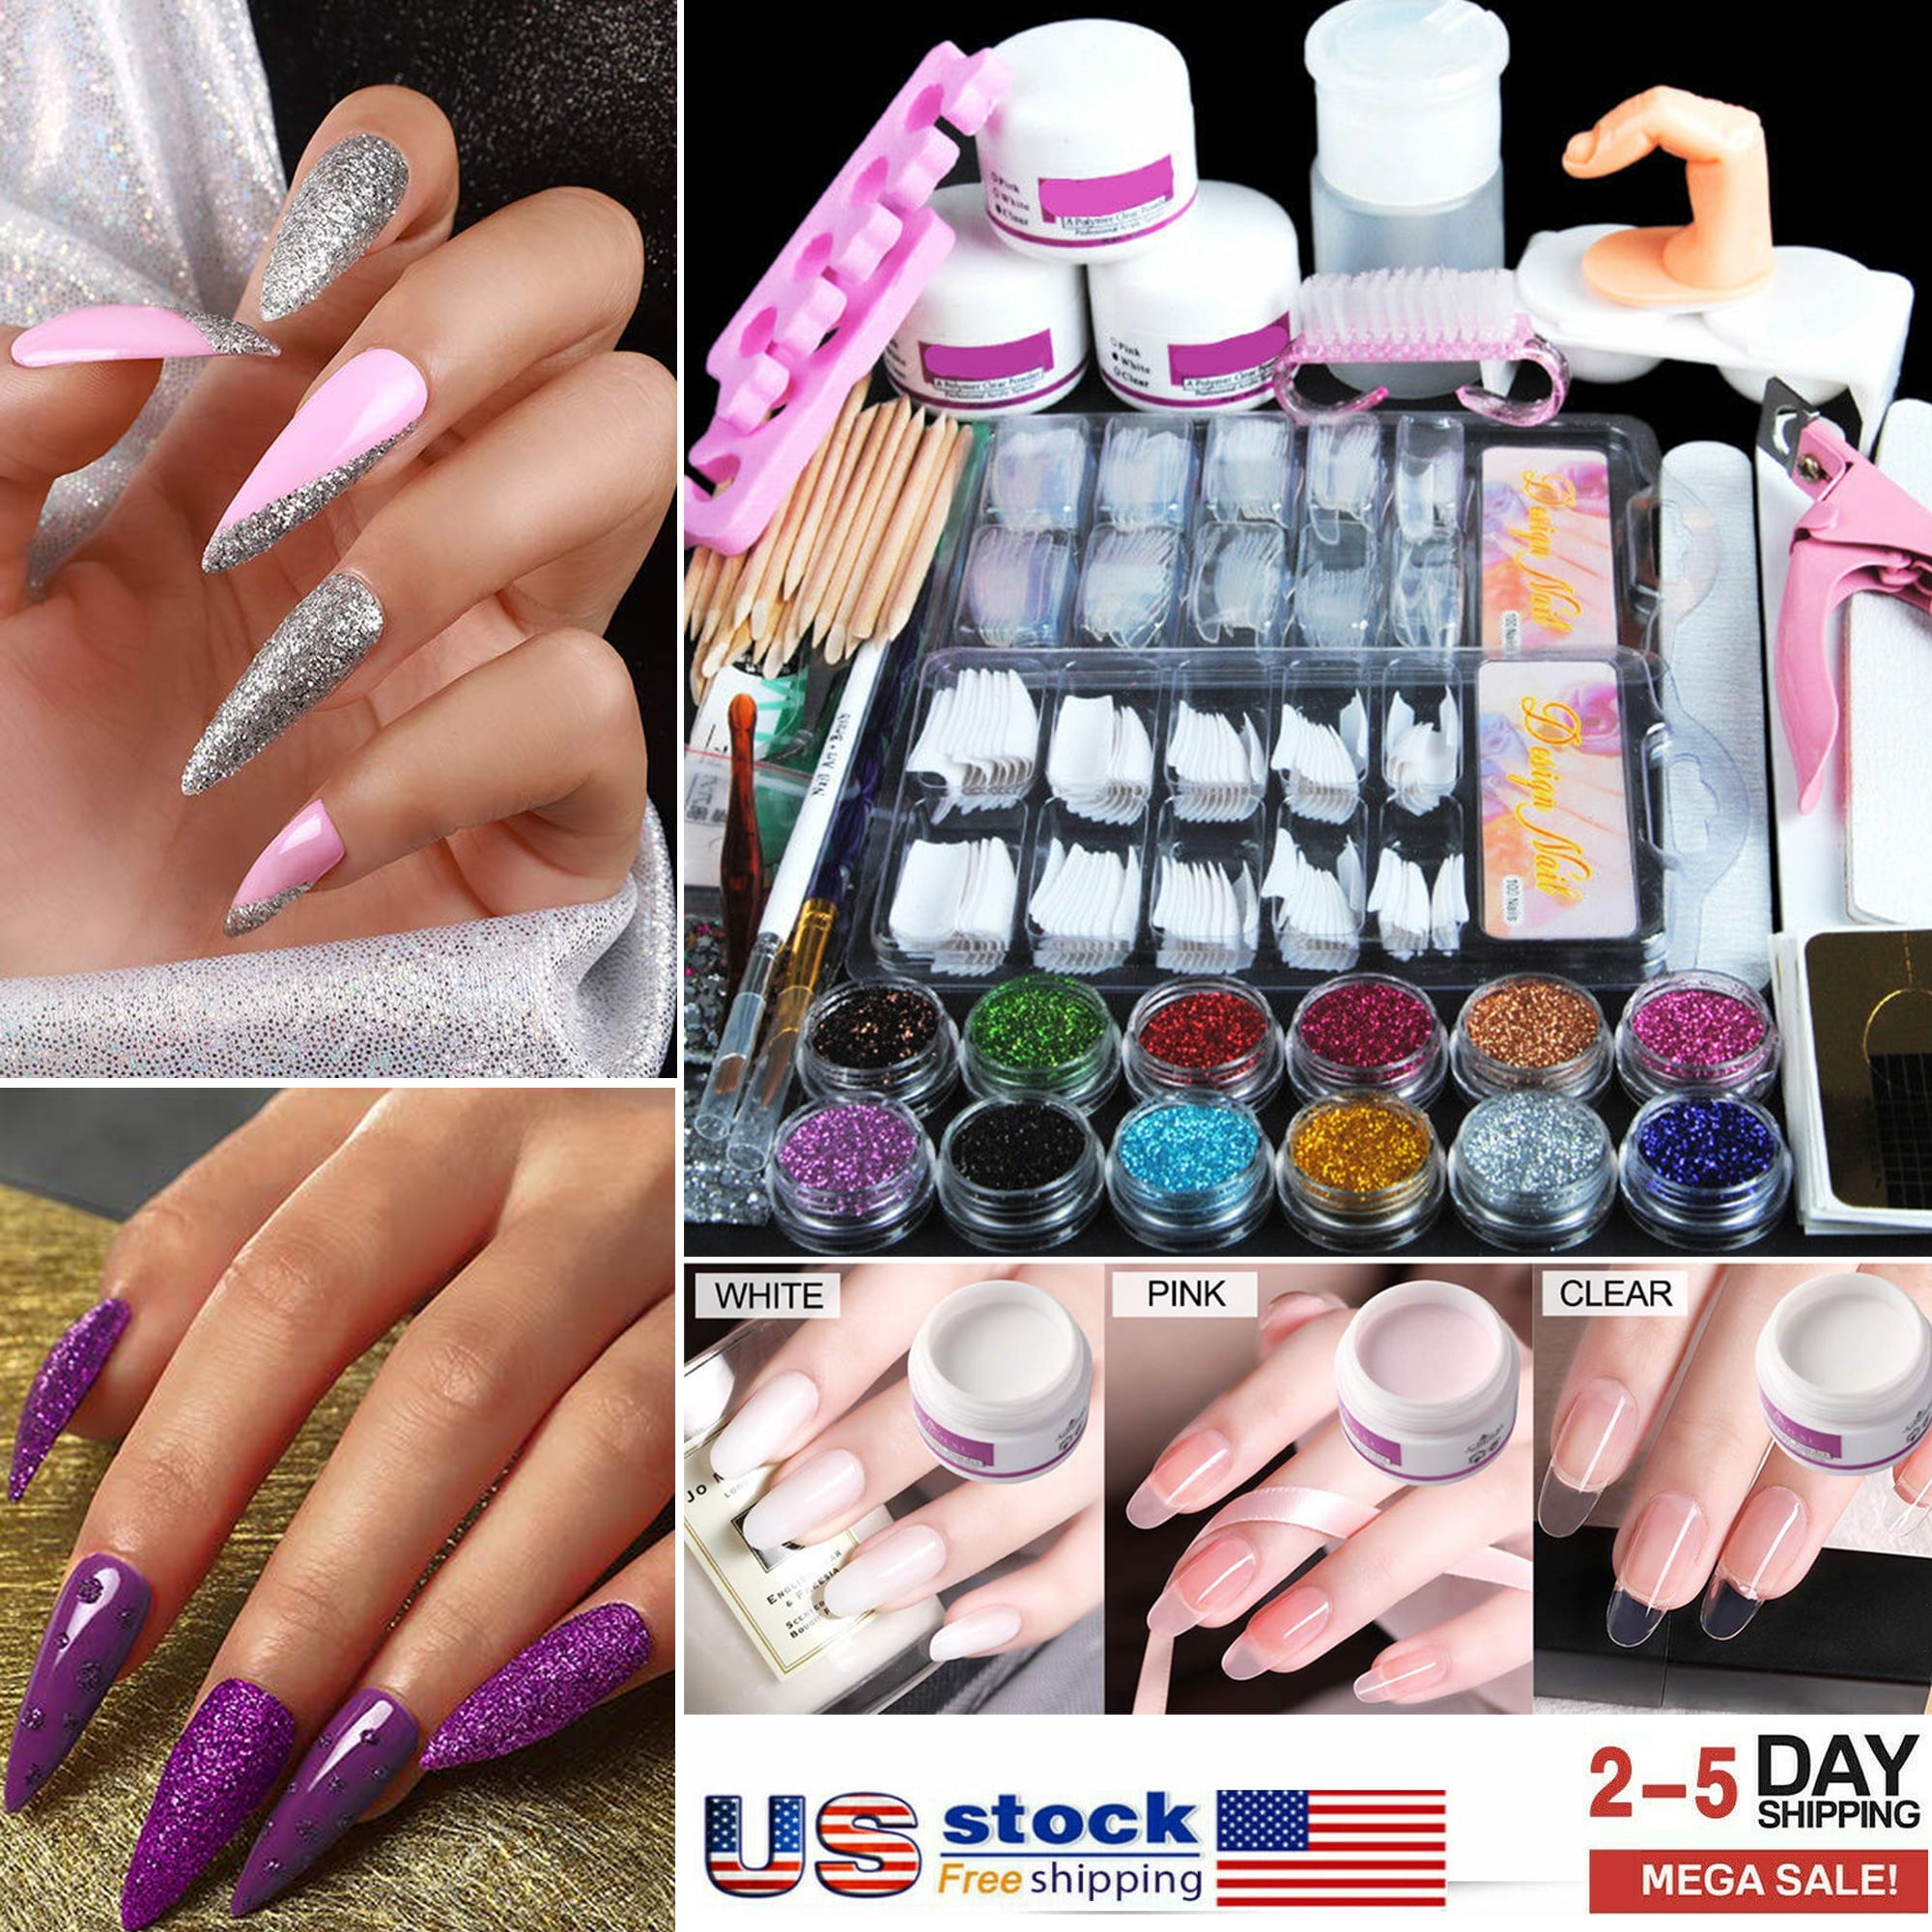 MOSKANY NAIL BEAUTY Store - Amazing products with exclusive discounts on  AliExpress